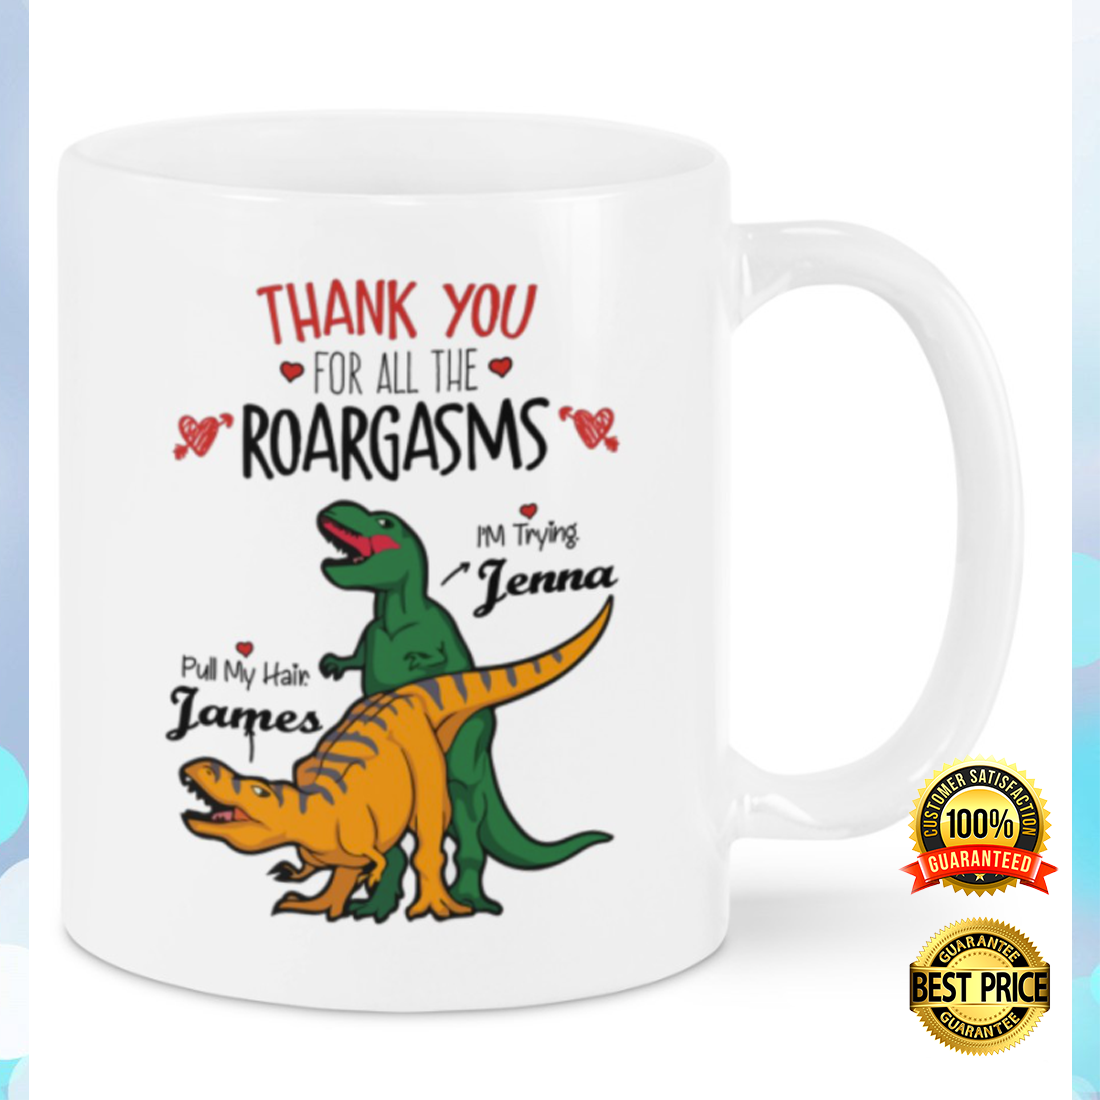 Personalized thank you for all the roargasms mug 3